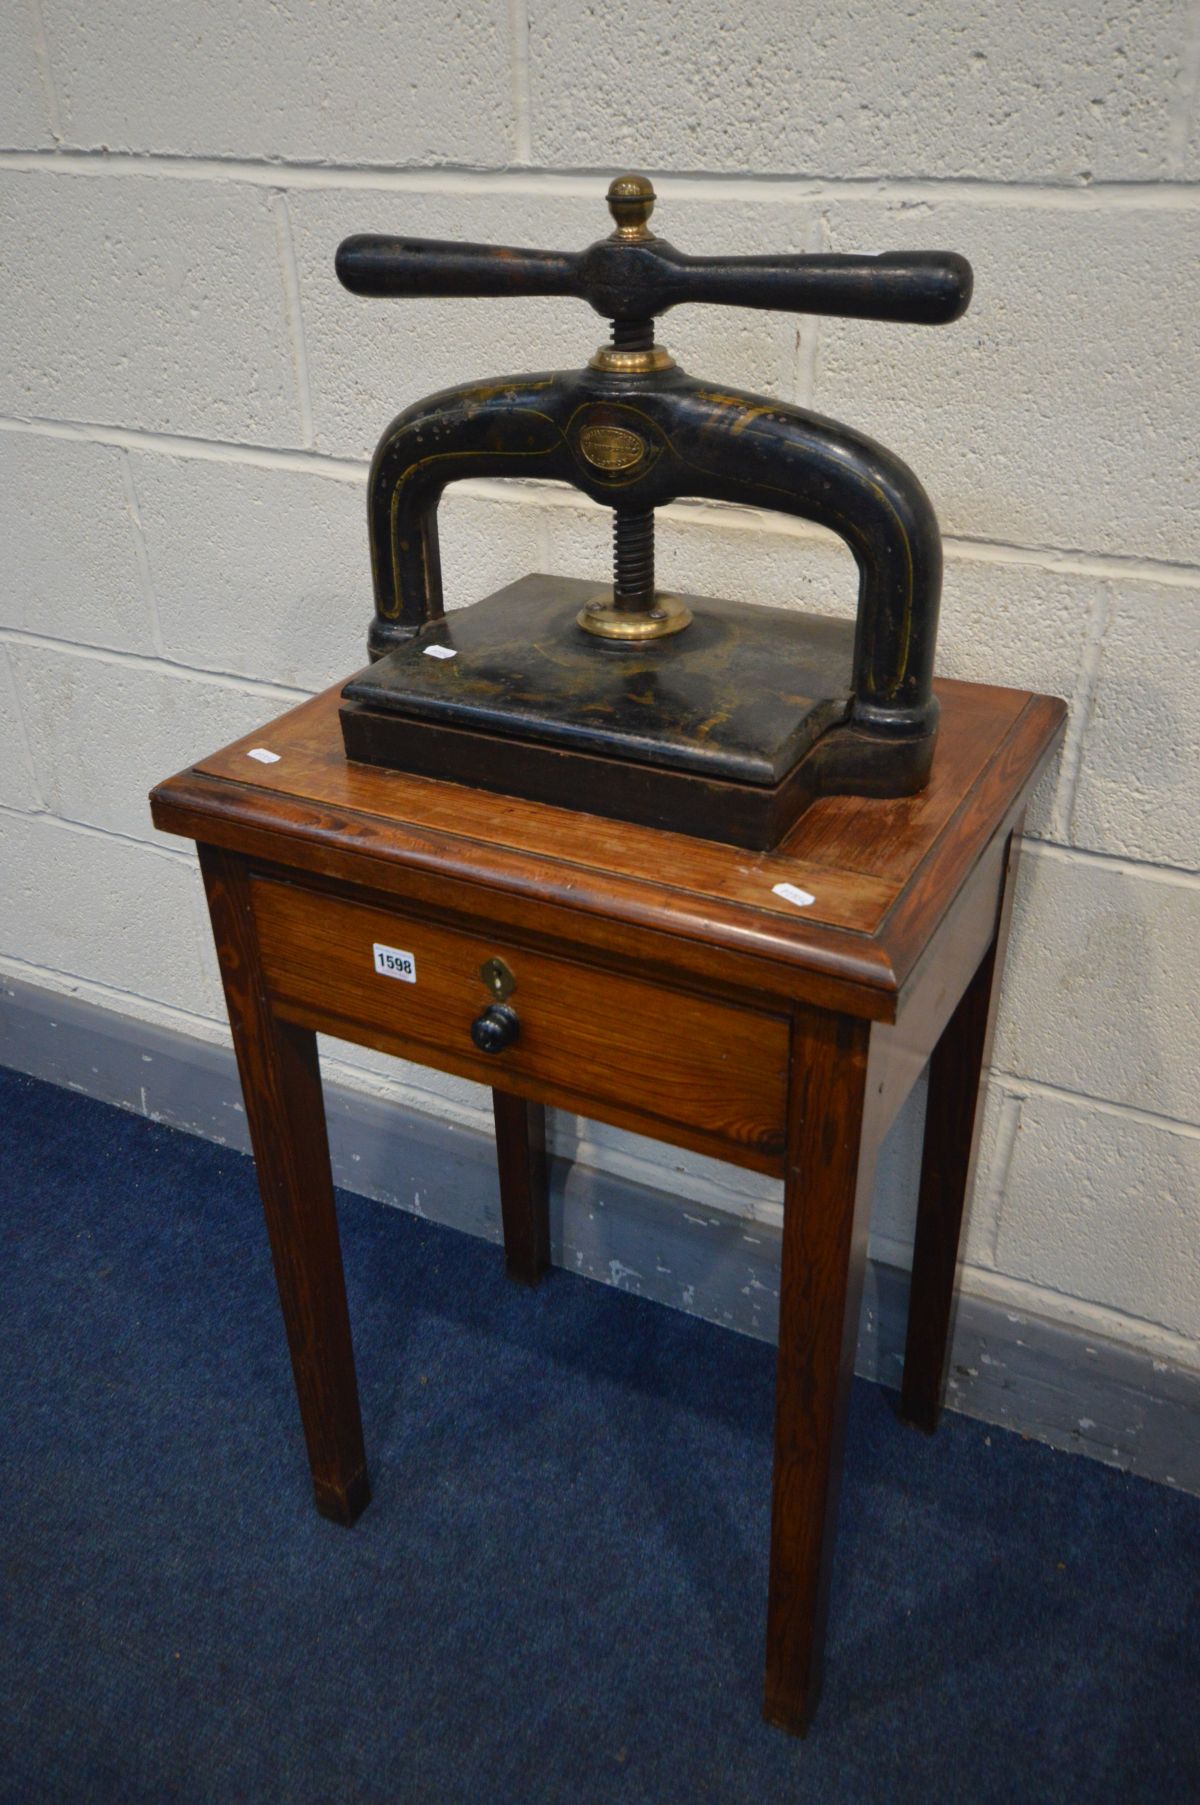 A VINTAGE CAST IRON BOOKPRESS, with a label reading William Mitchell, Birmingham & London, on a